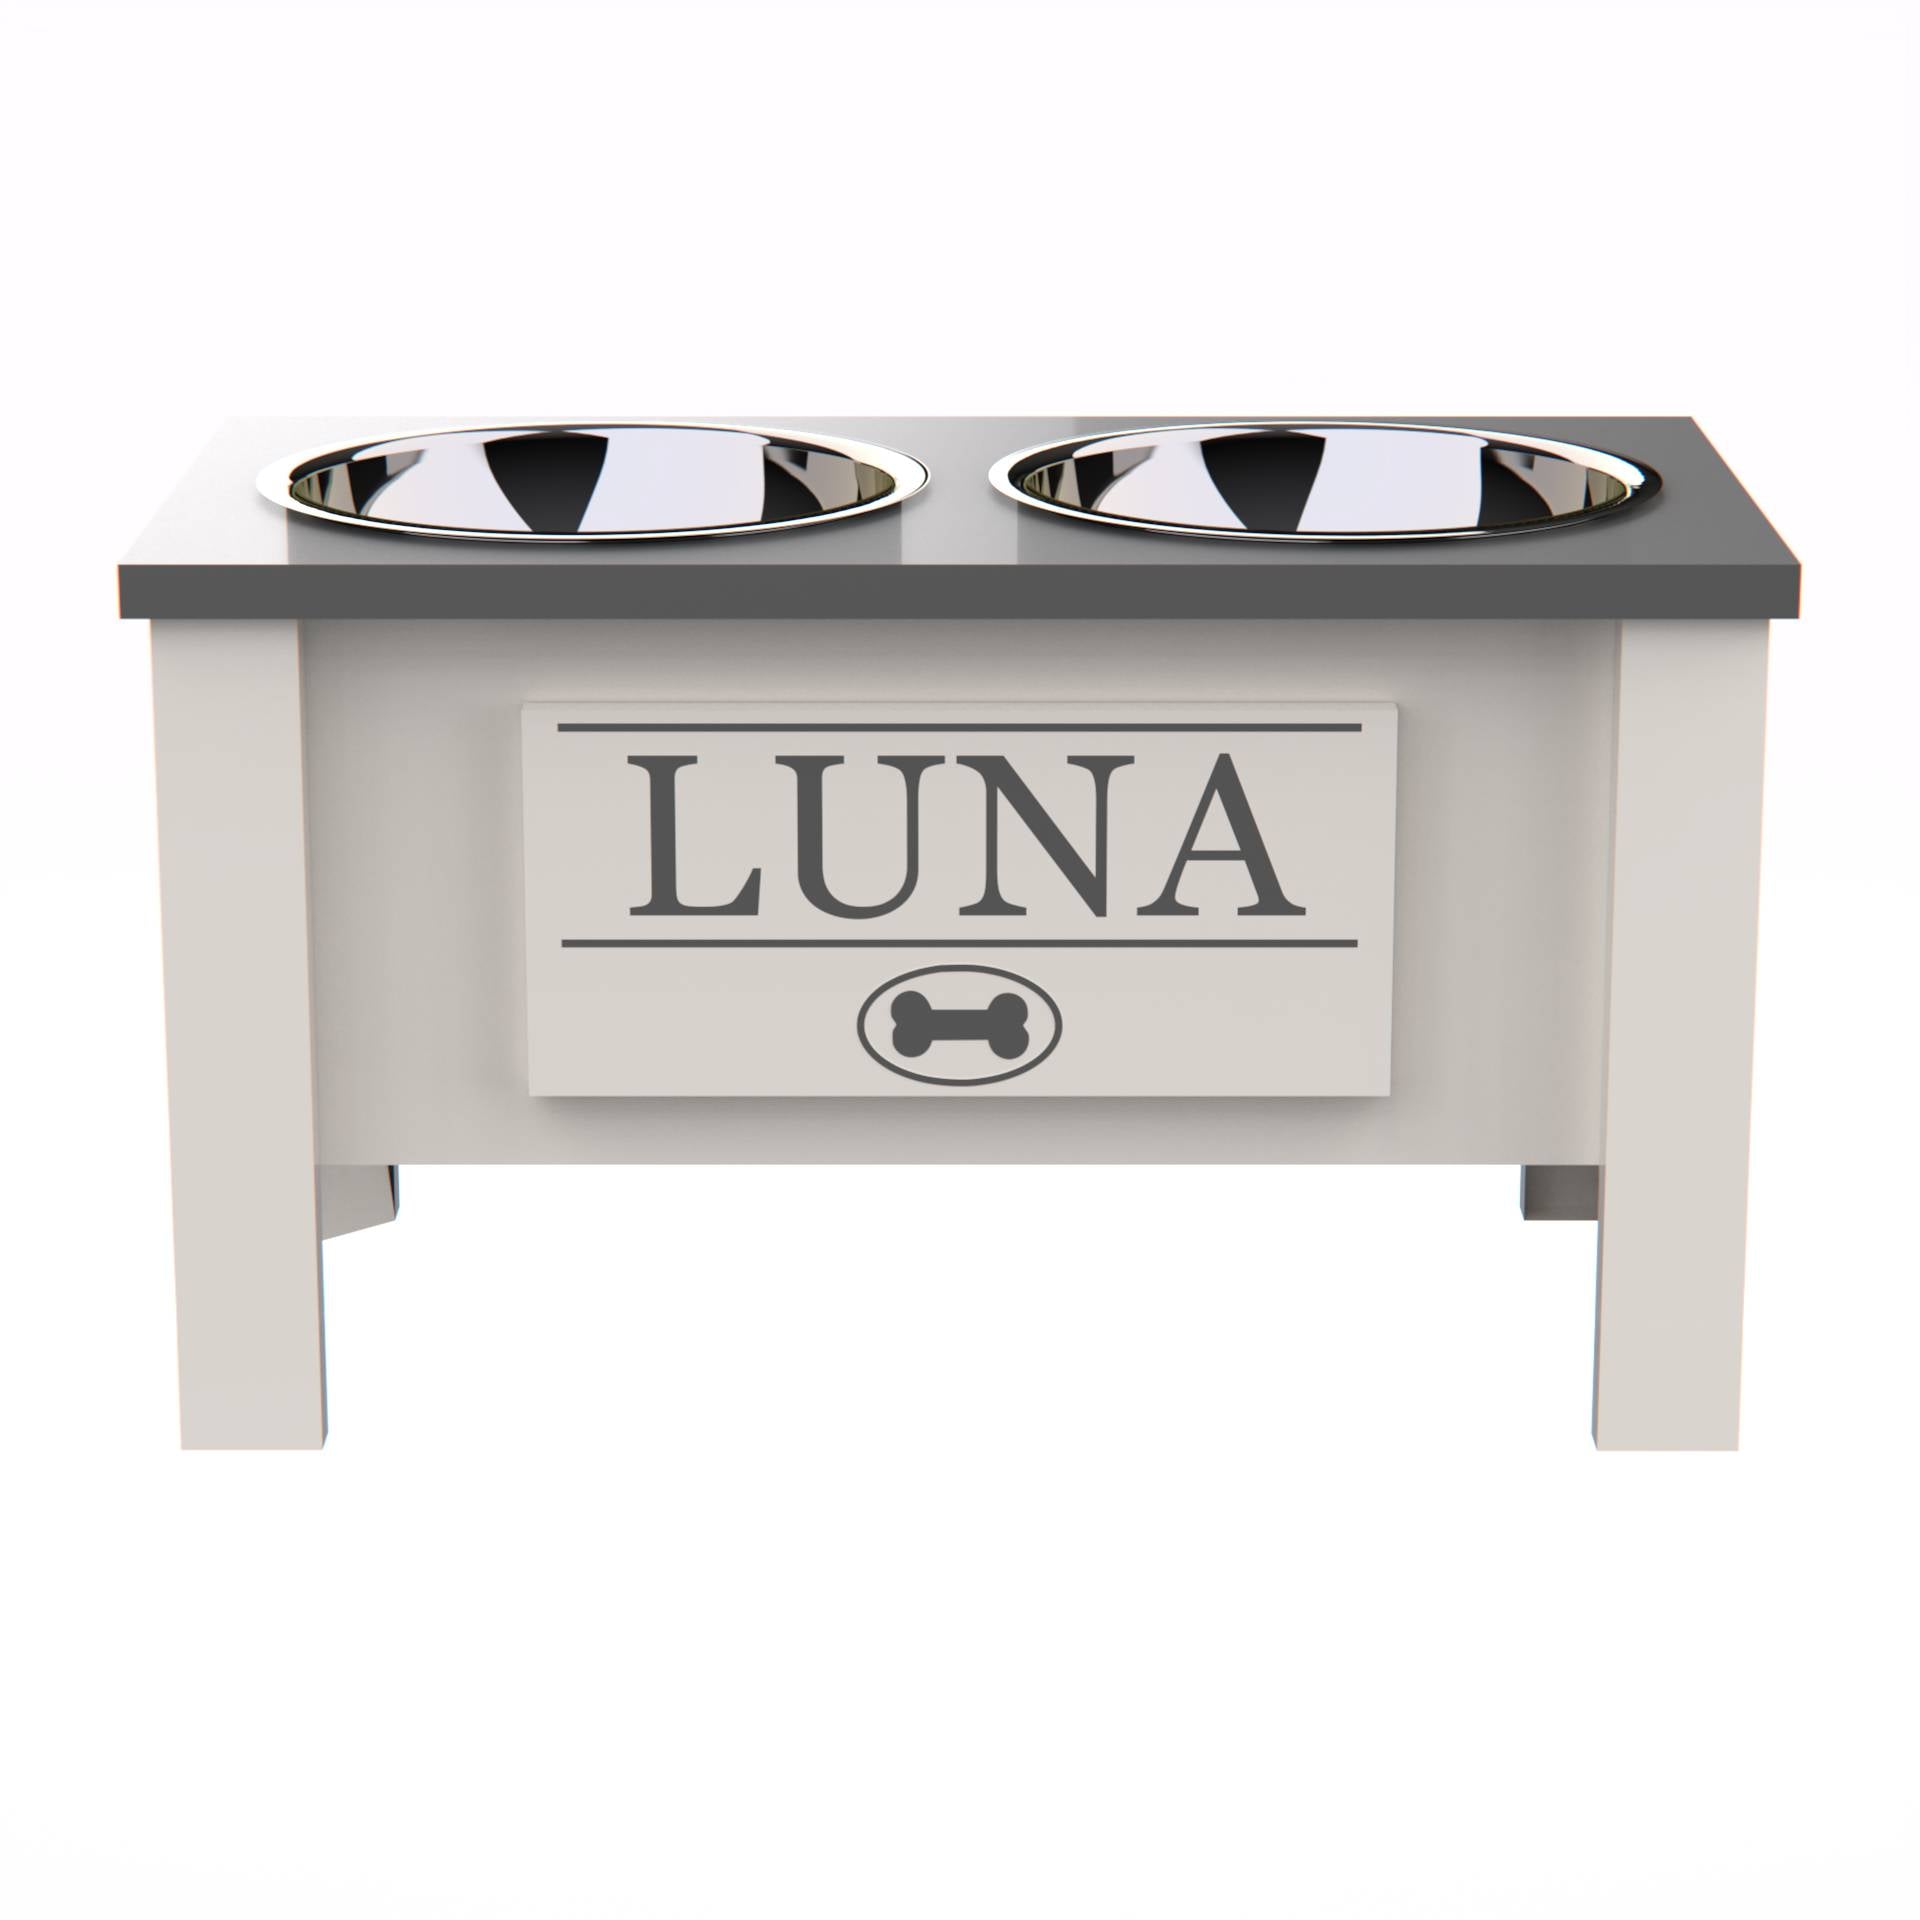 Personalized Elevated Dog Bowl in Lunar Grey - GrooveThis Woodshop - GT002GREY-L